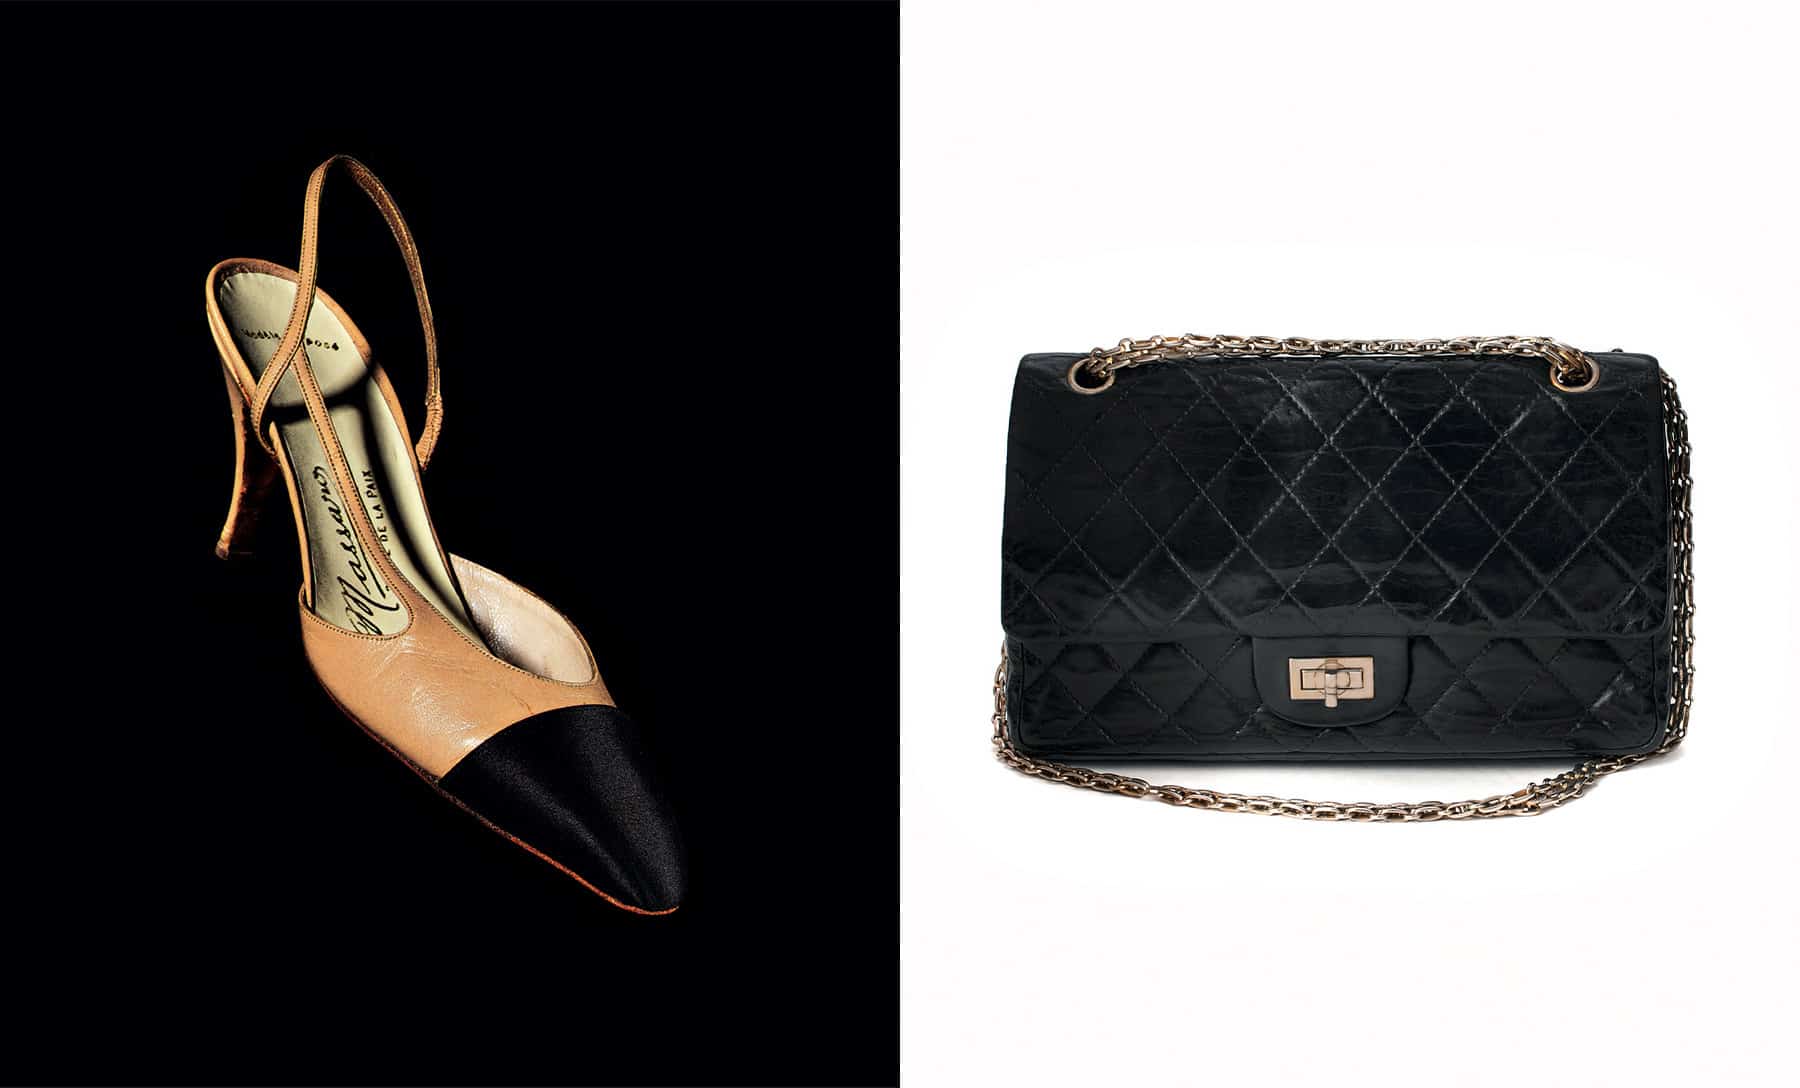 Chanel leather and satin shoes, quilted handbag